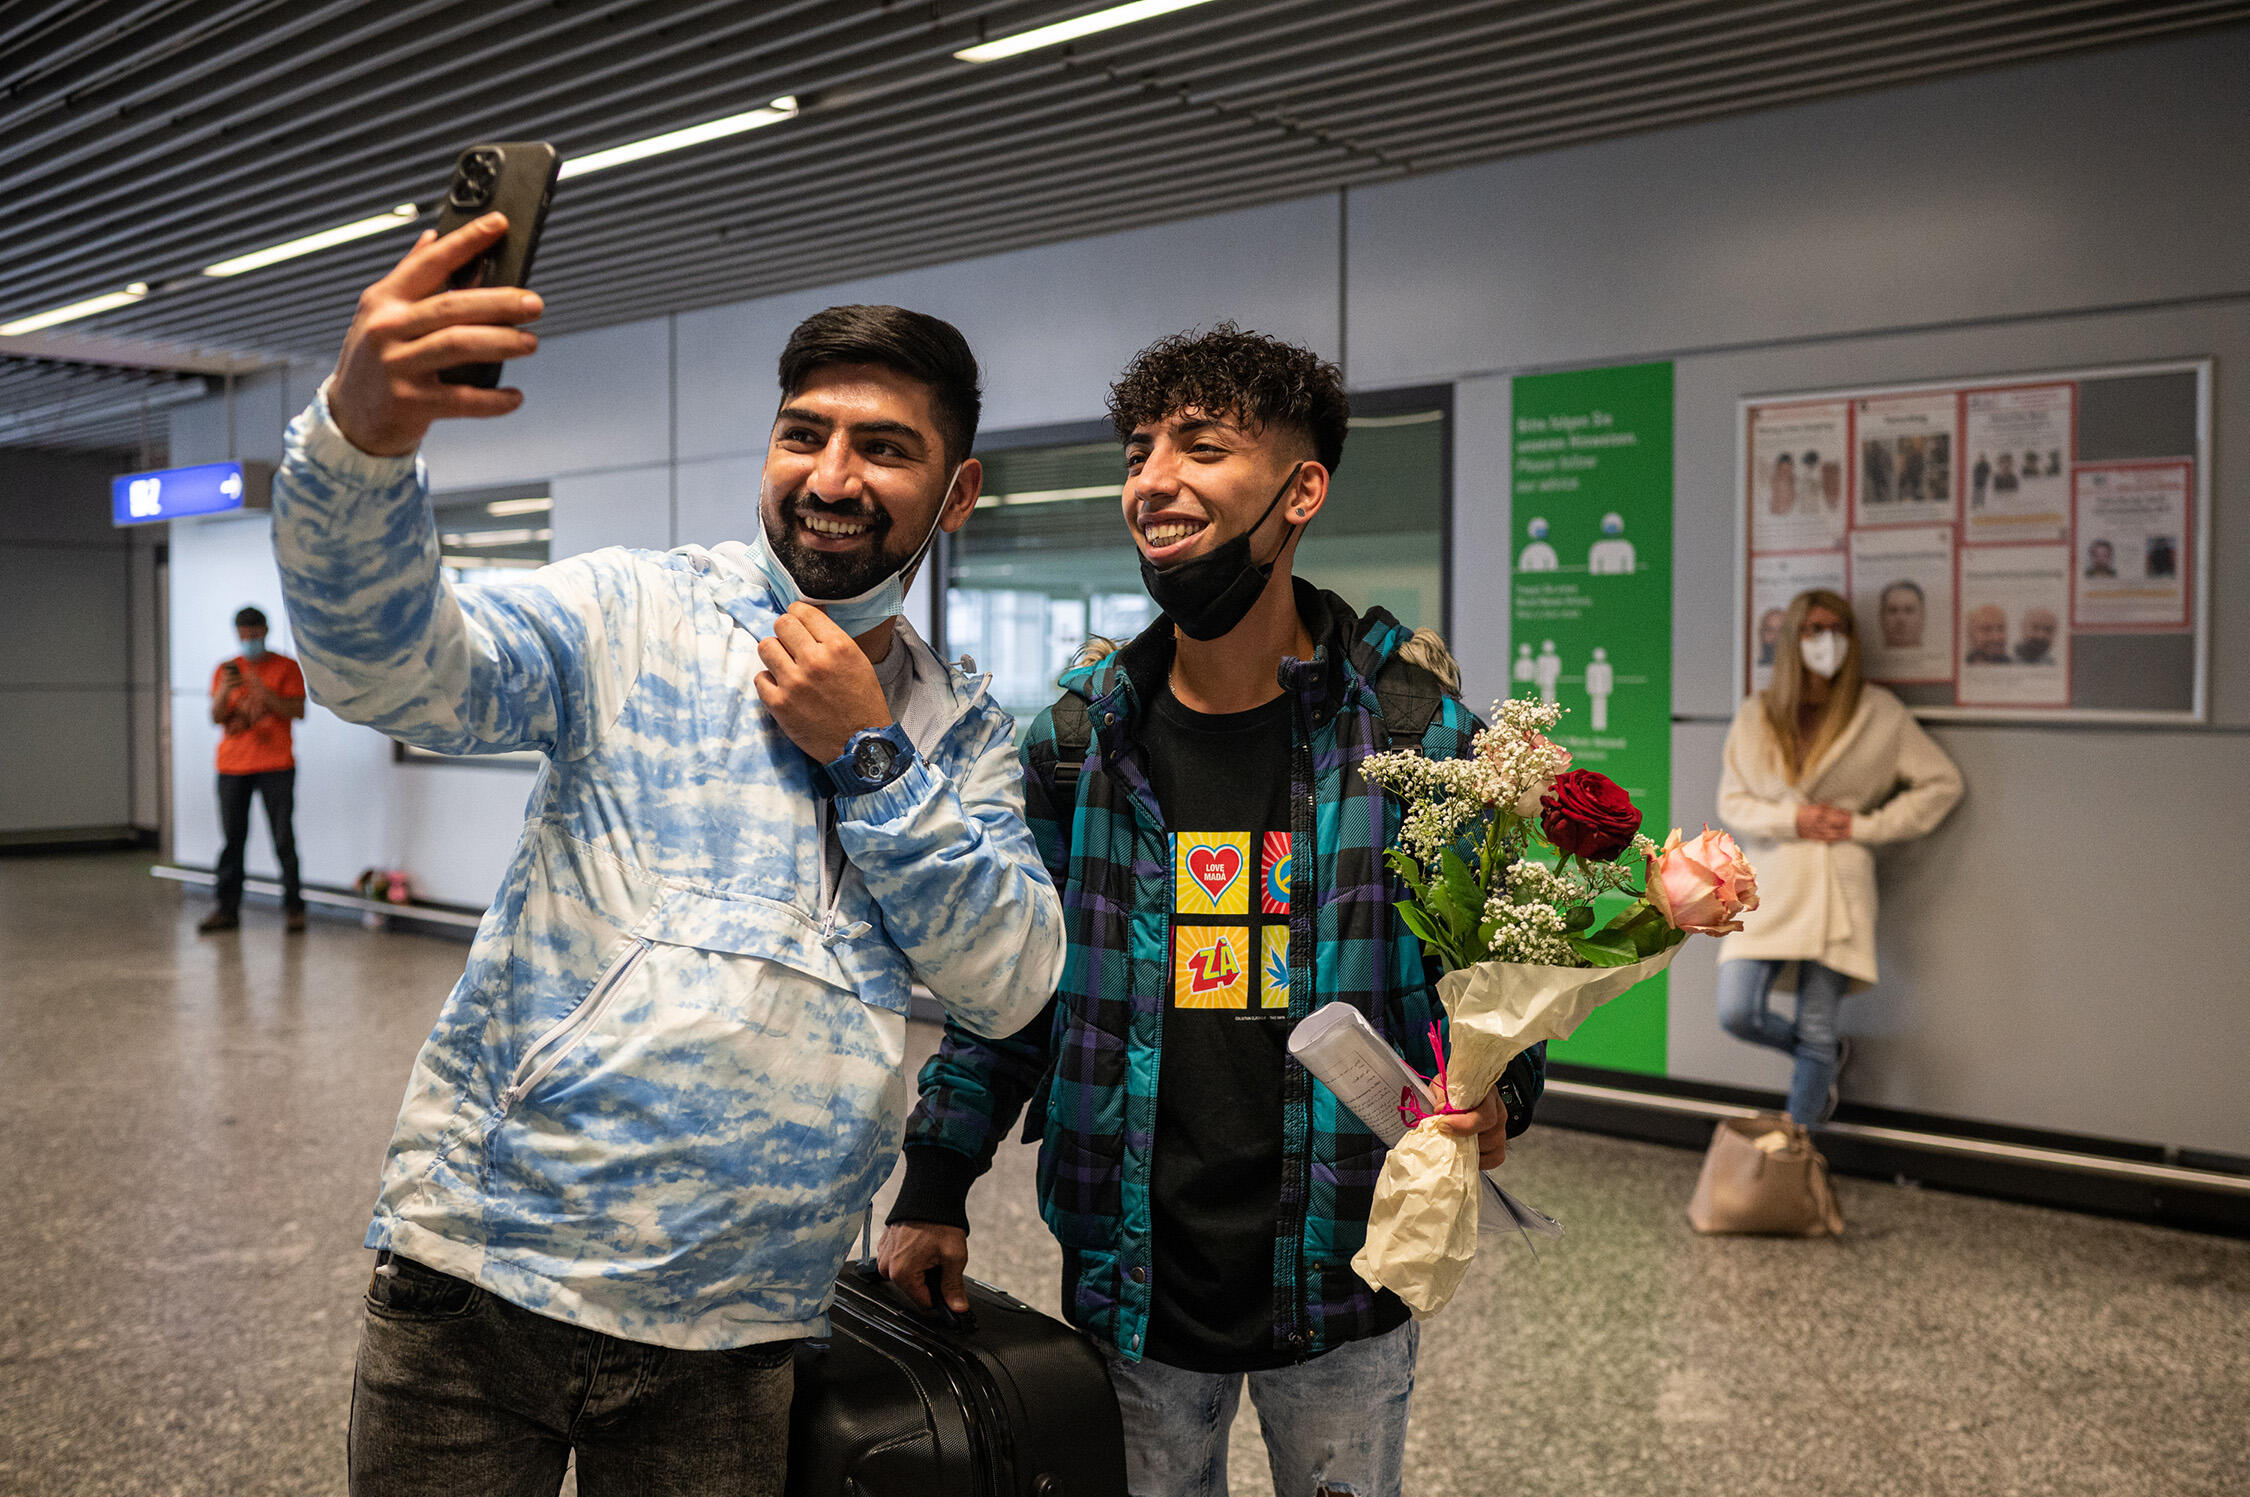 Brothers Ali and Mehdi take a selfie together at the airport.  